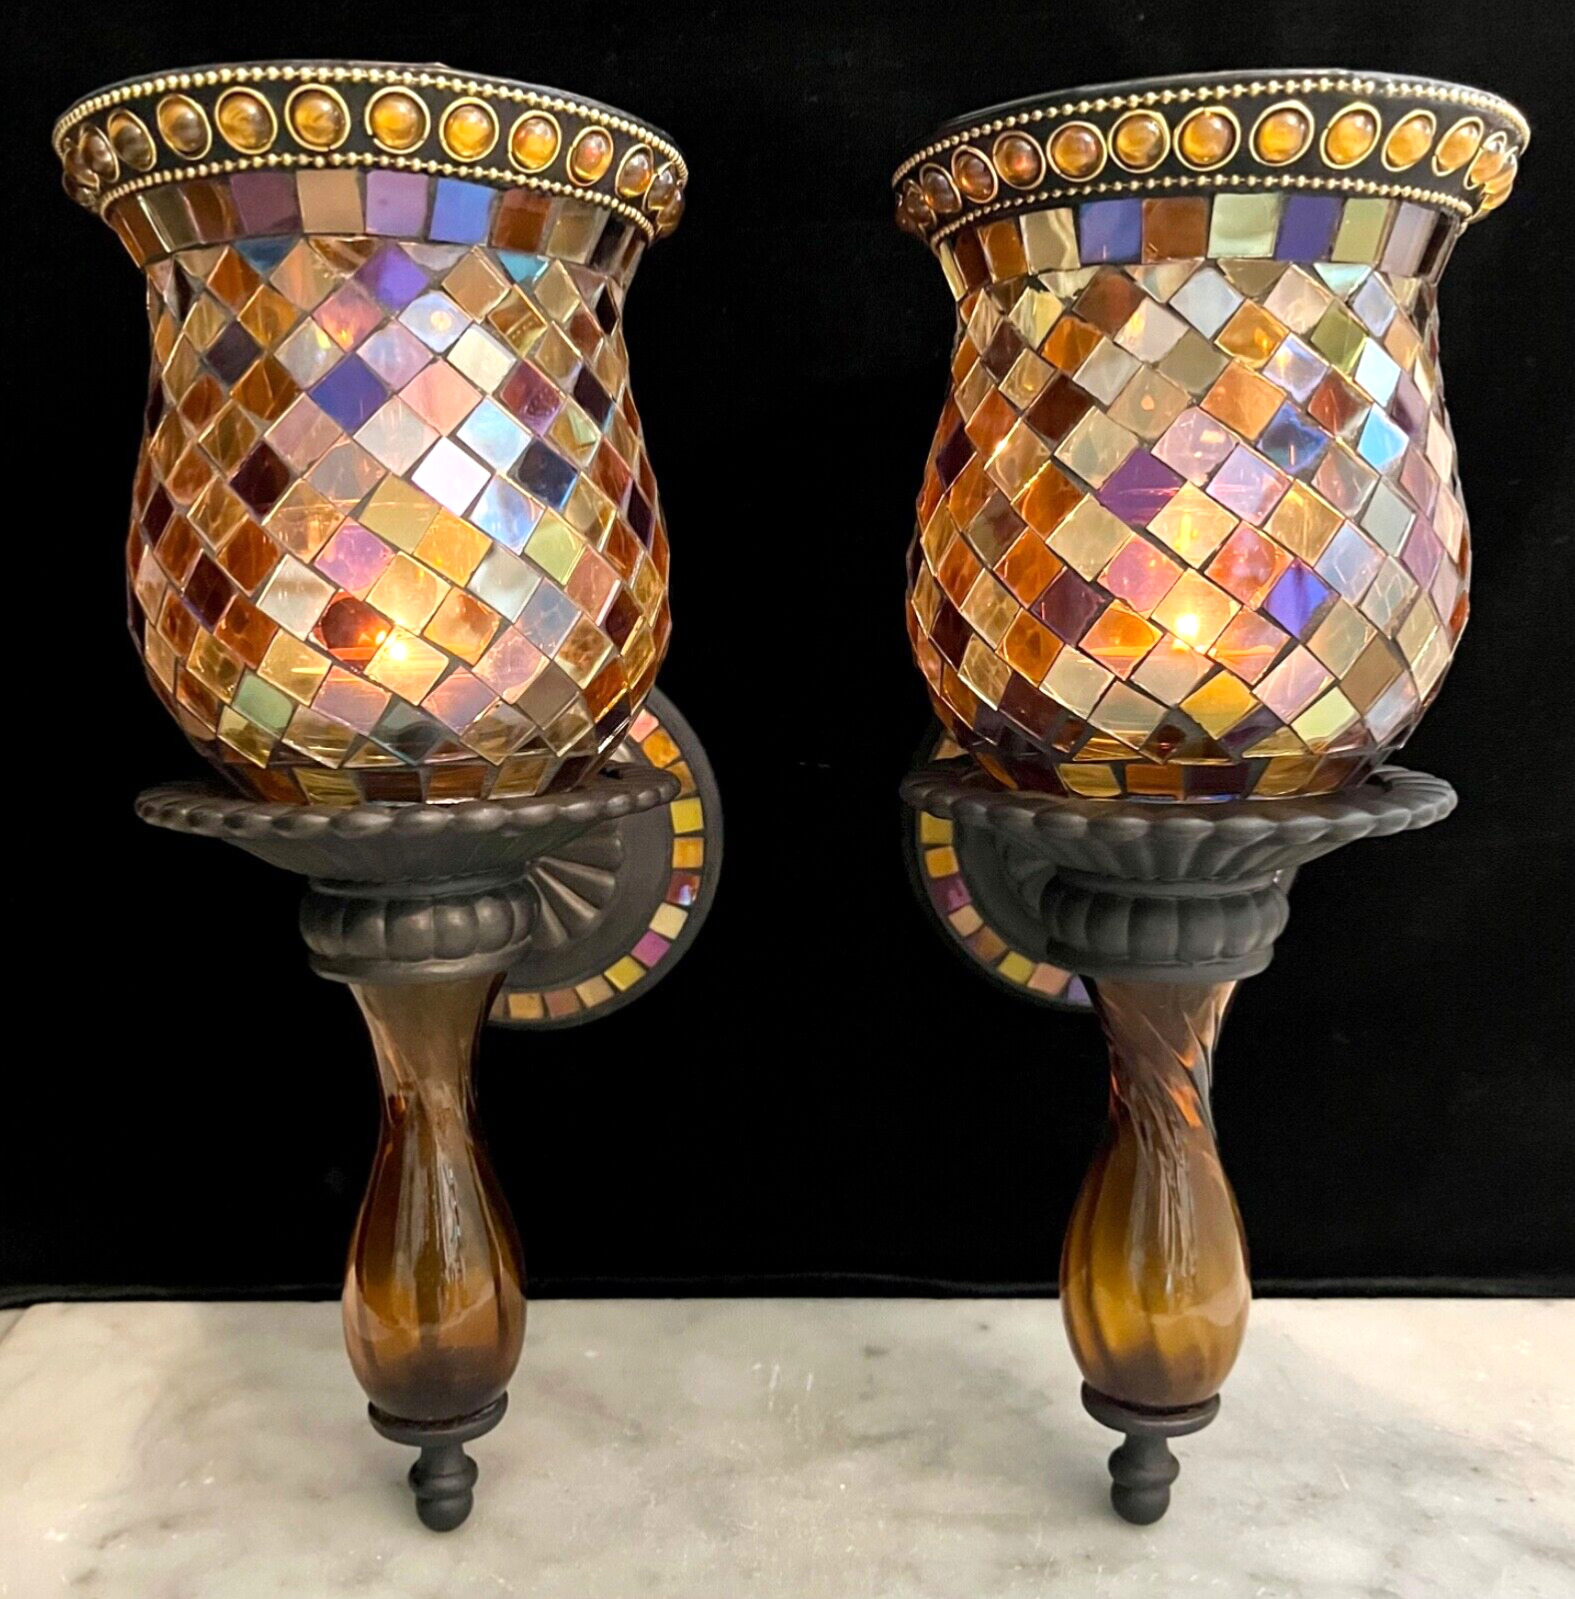 Partylite Global Fusion Mosaic Glass Wall Sconce Candle Holders Set of 2